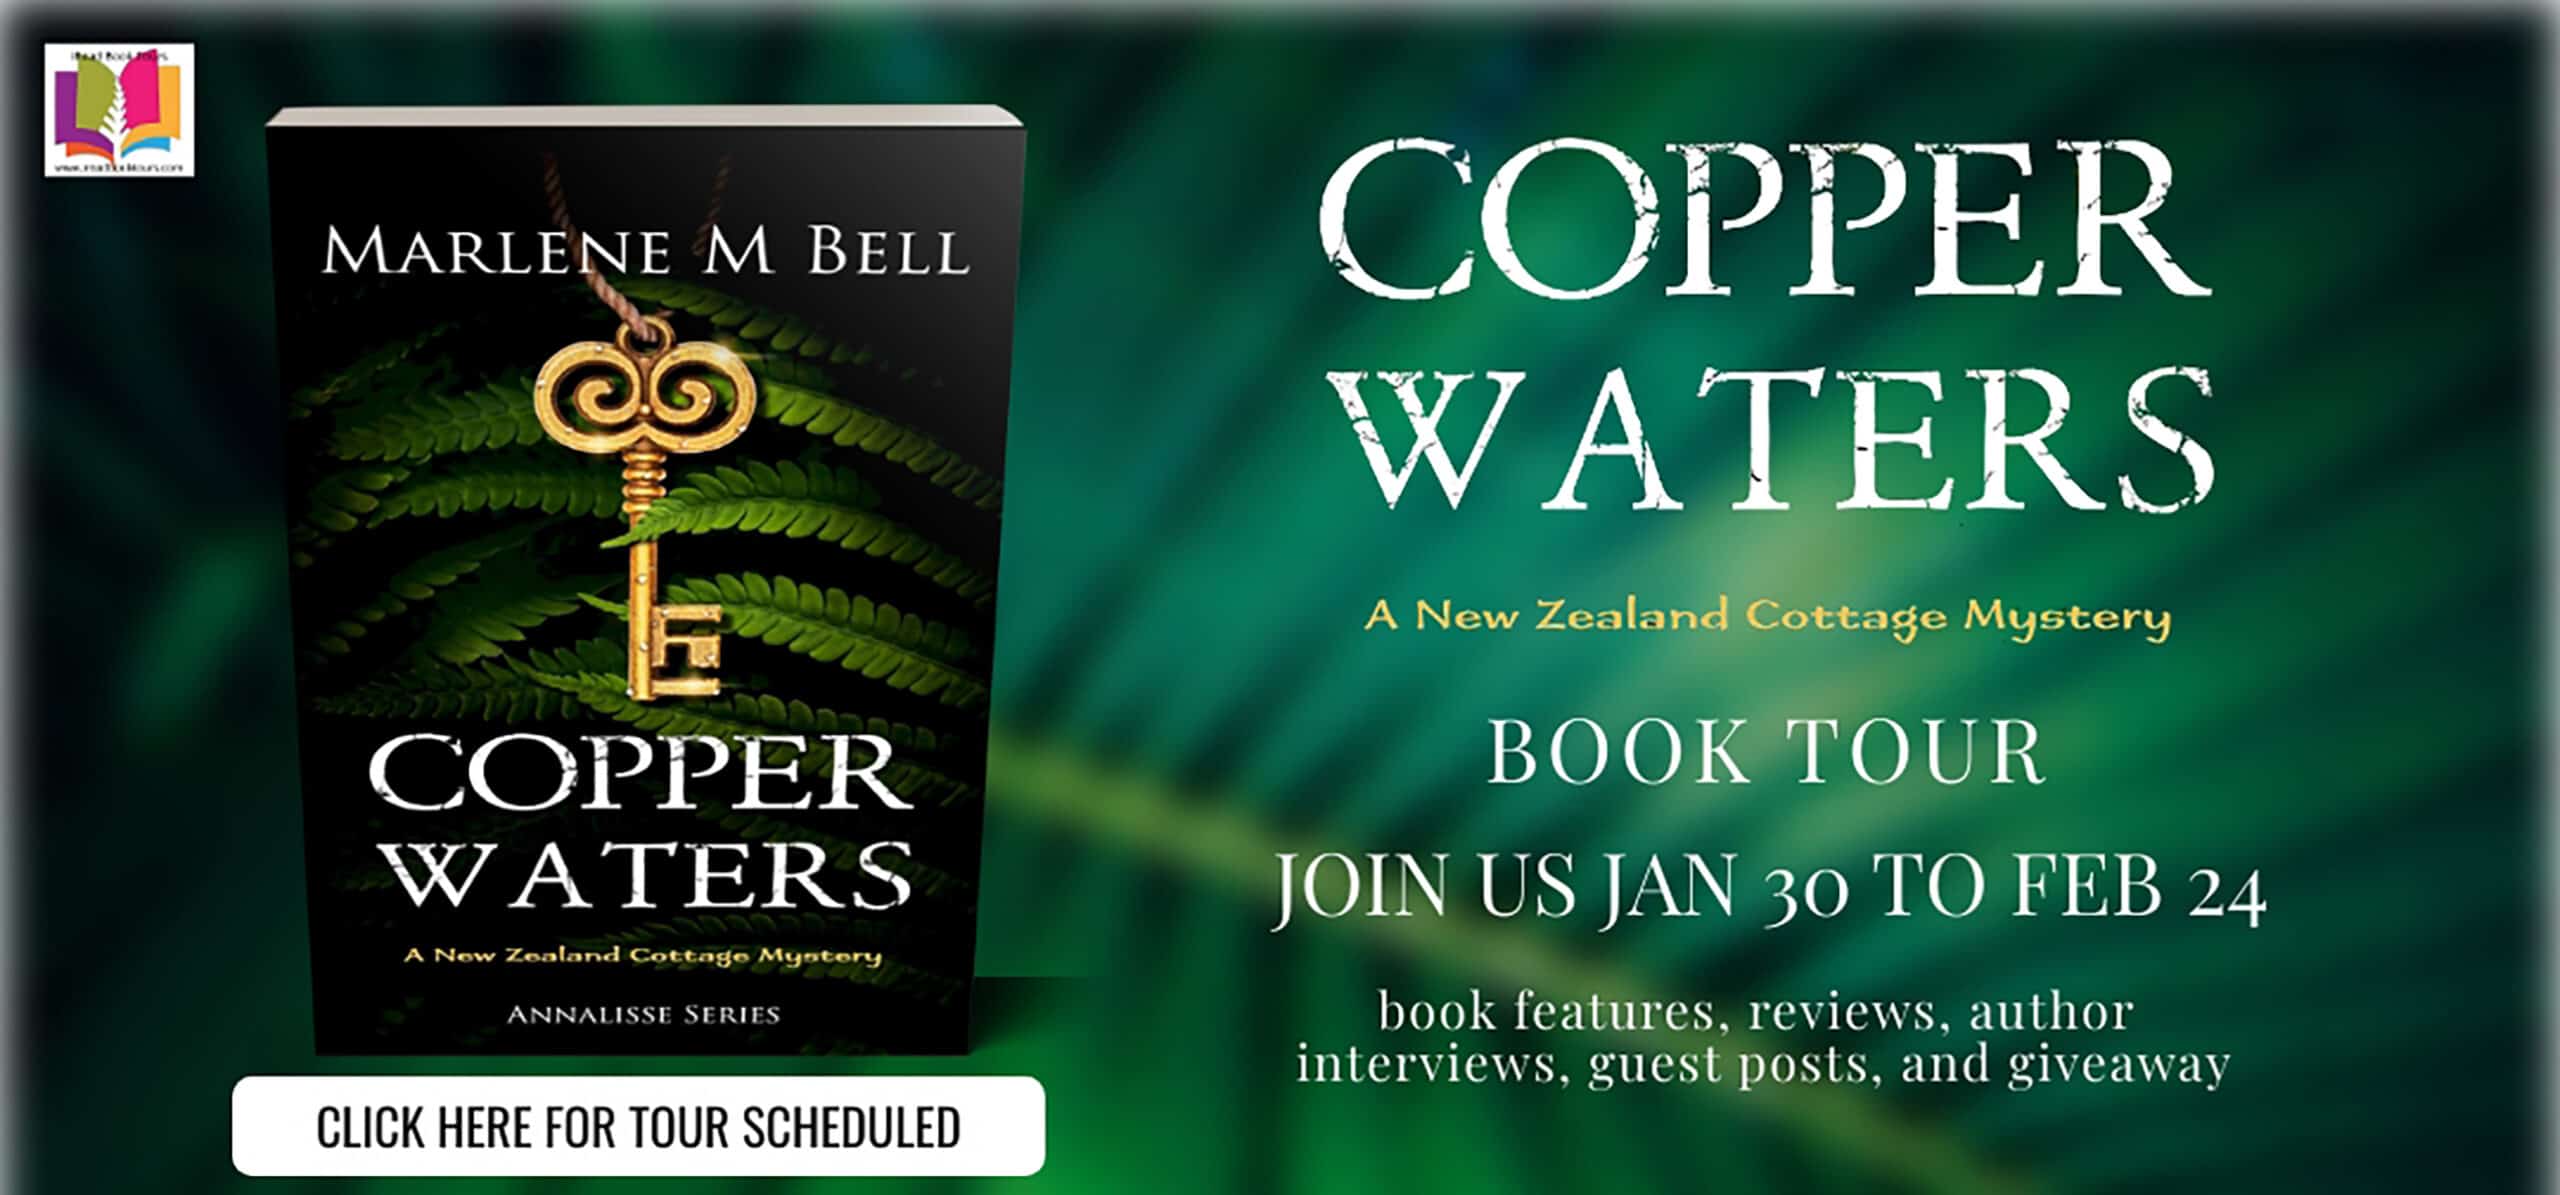 Copper Waters - A New Zealand Mystery (Annalisse Series Book 4) by Marlene M. Bell | Book Review ~ Author Guest Post ~ $360 Grand Prize